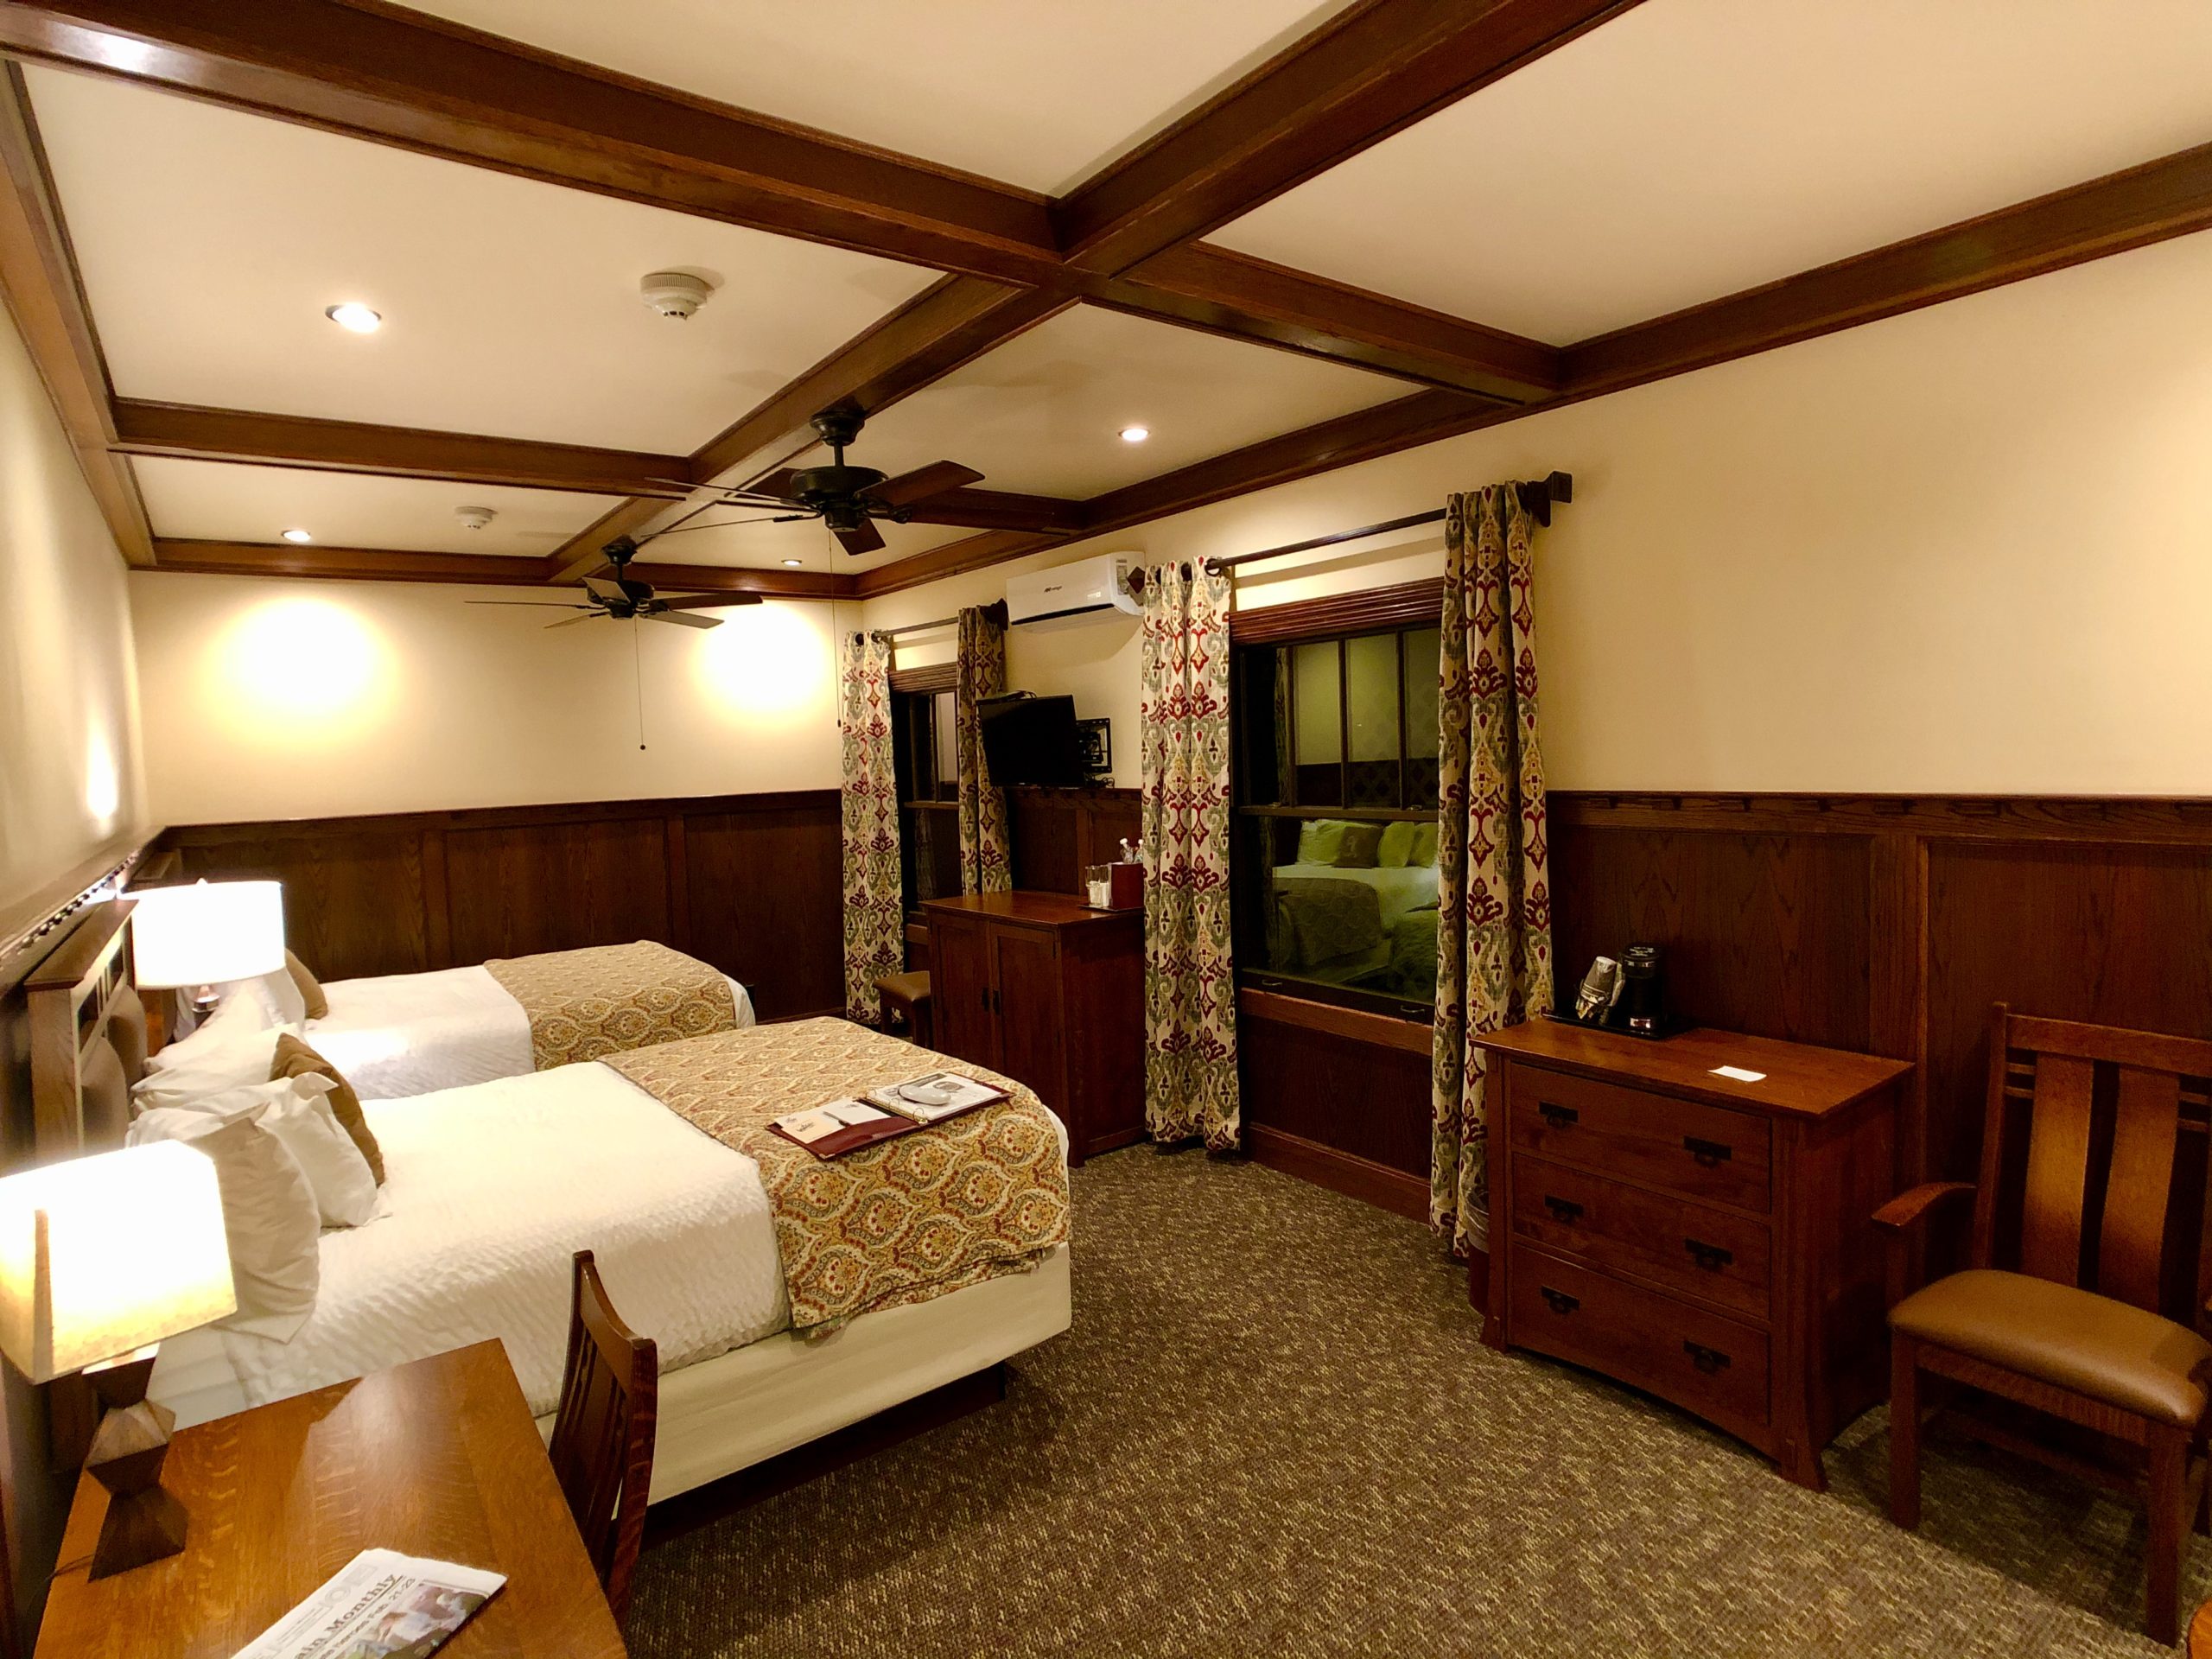 A view of a Double Queen Platinum Room facing the windows and dressers.